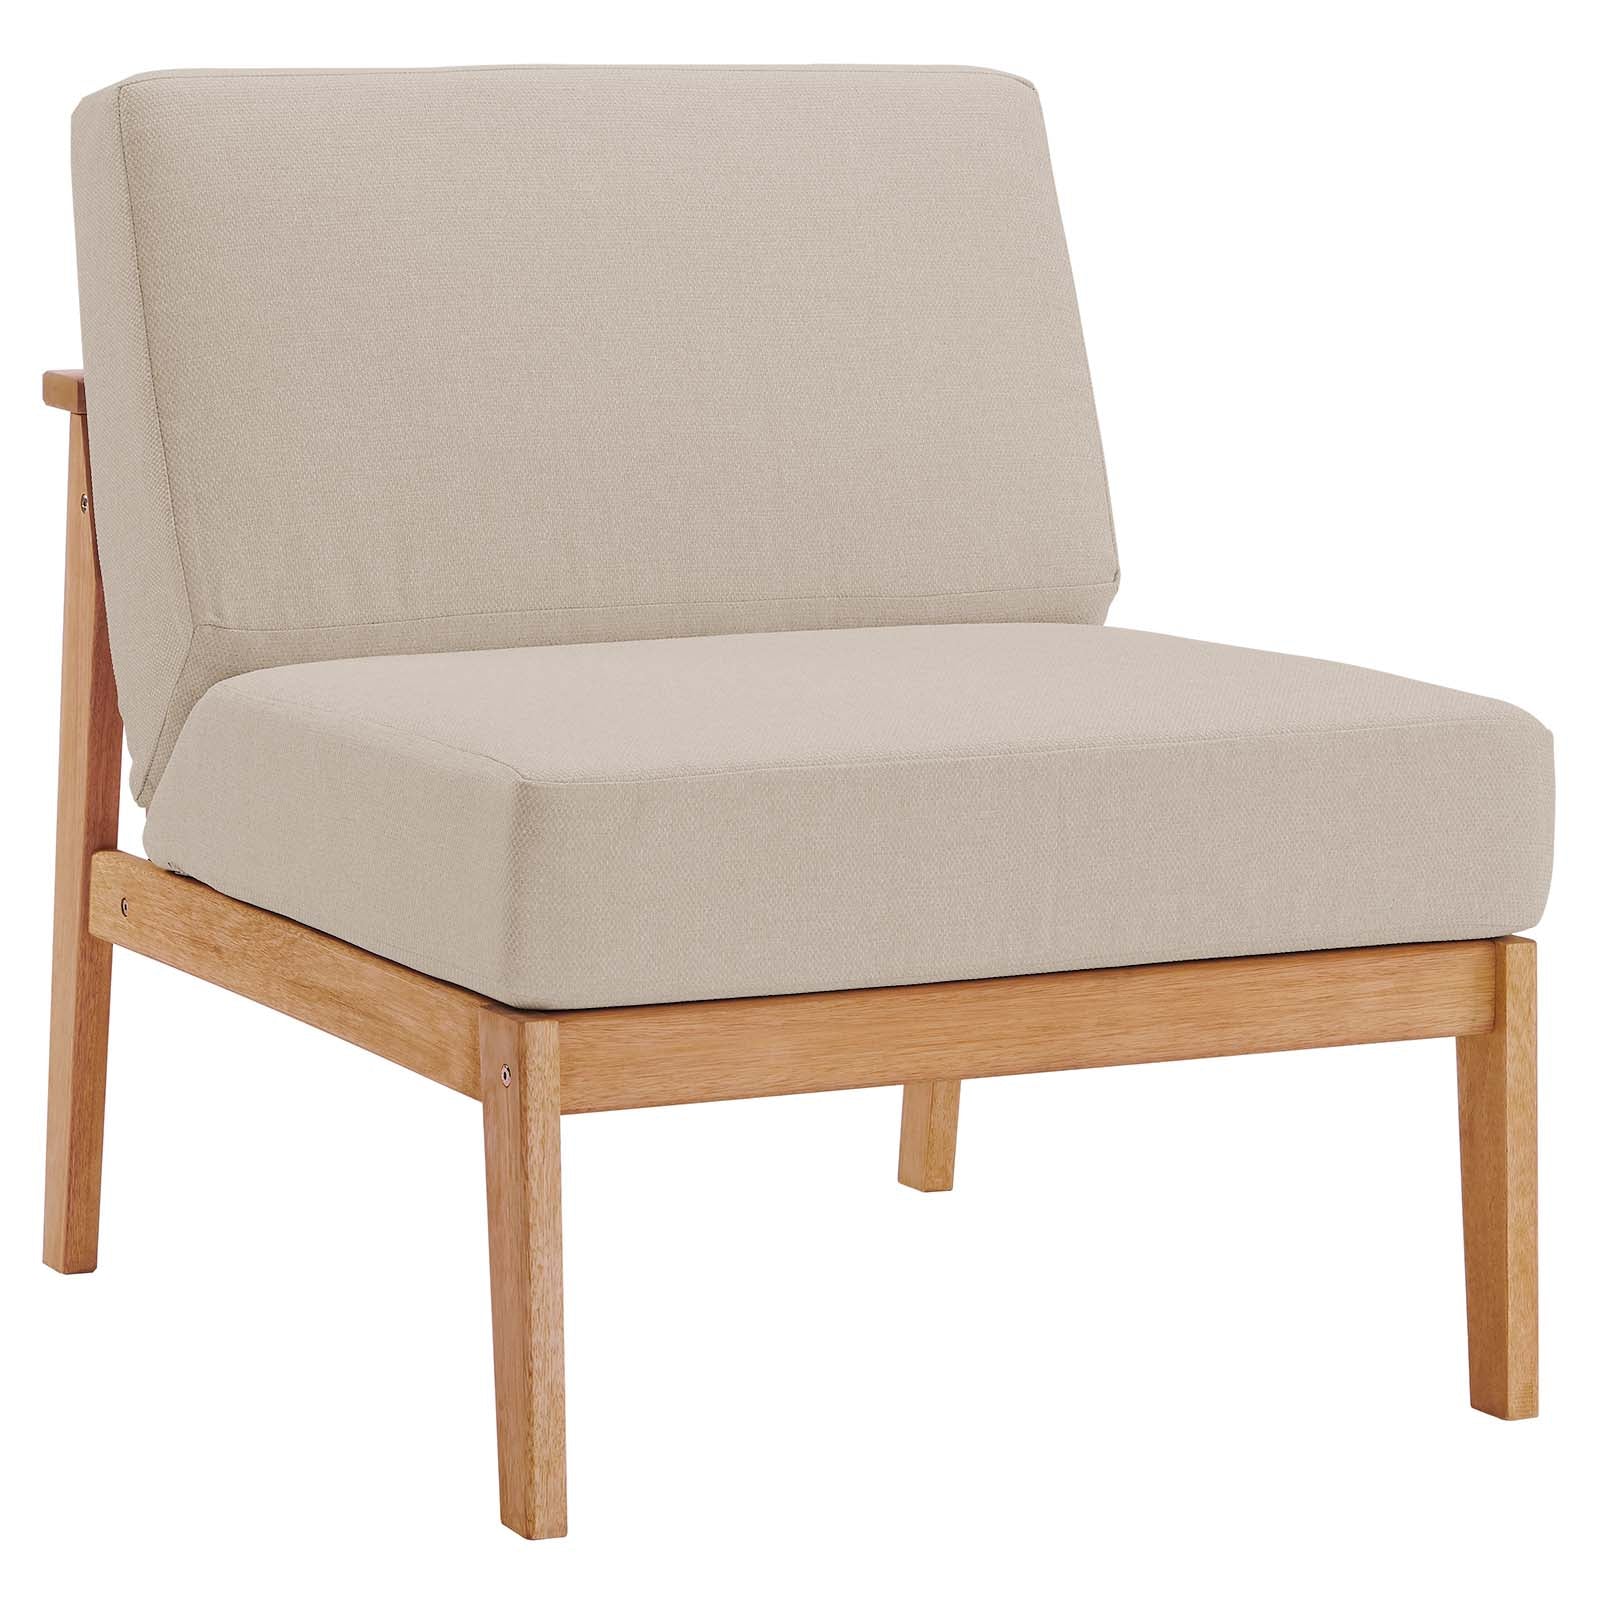 Modway Outdoor Chairs - Sedona Outdoor Patio Eucalyptus Wood Sectional Sofa Armless Chair Natural Taupe